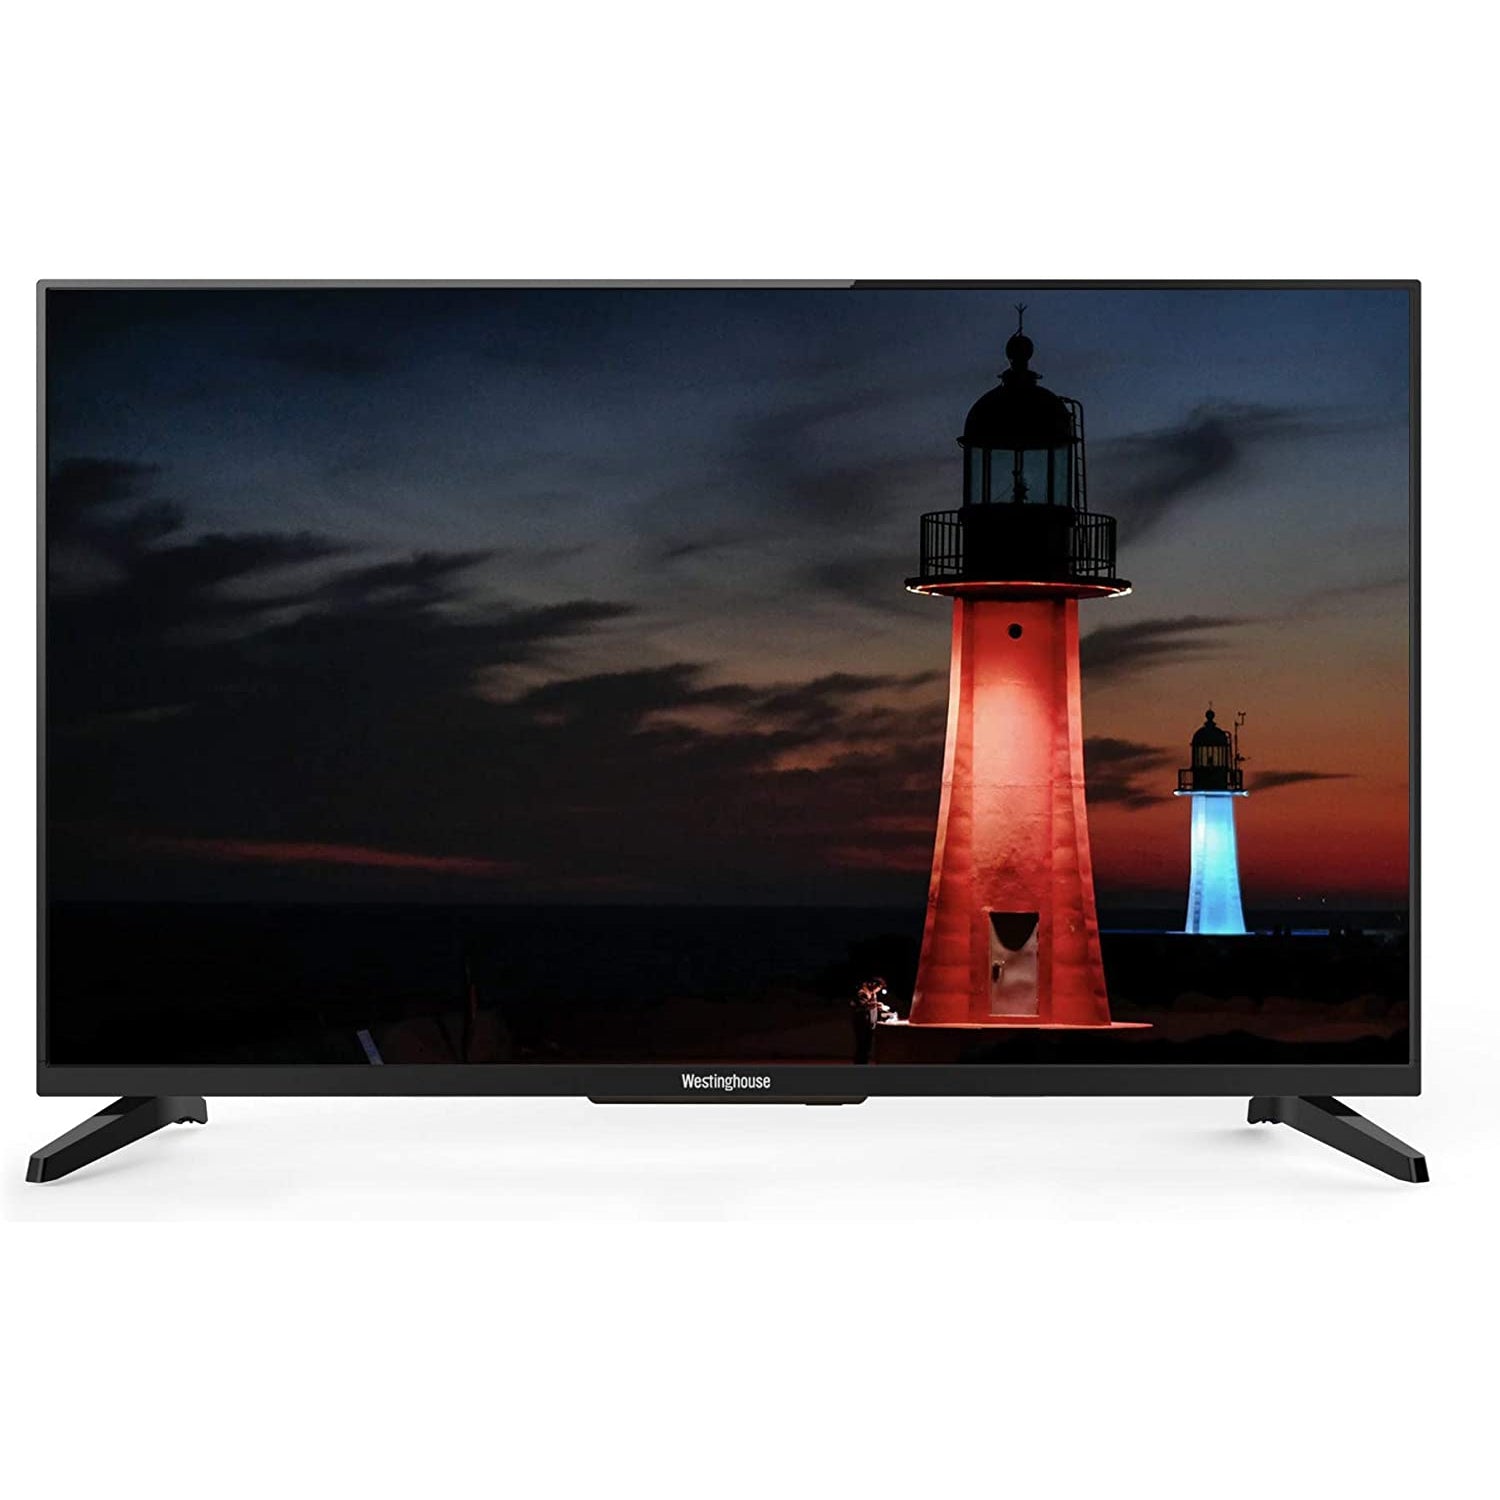 Westinghouse 32" Inch HD LED WD32HP1210 TV with Freeview, 3x HDMI and 2x USB PVR Playback